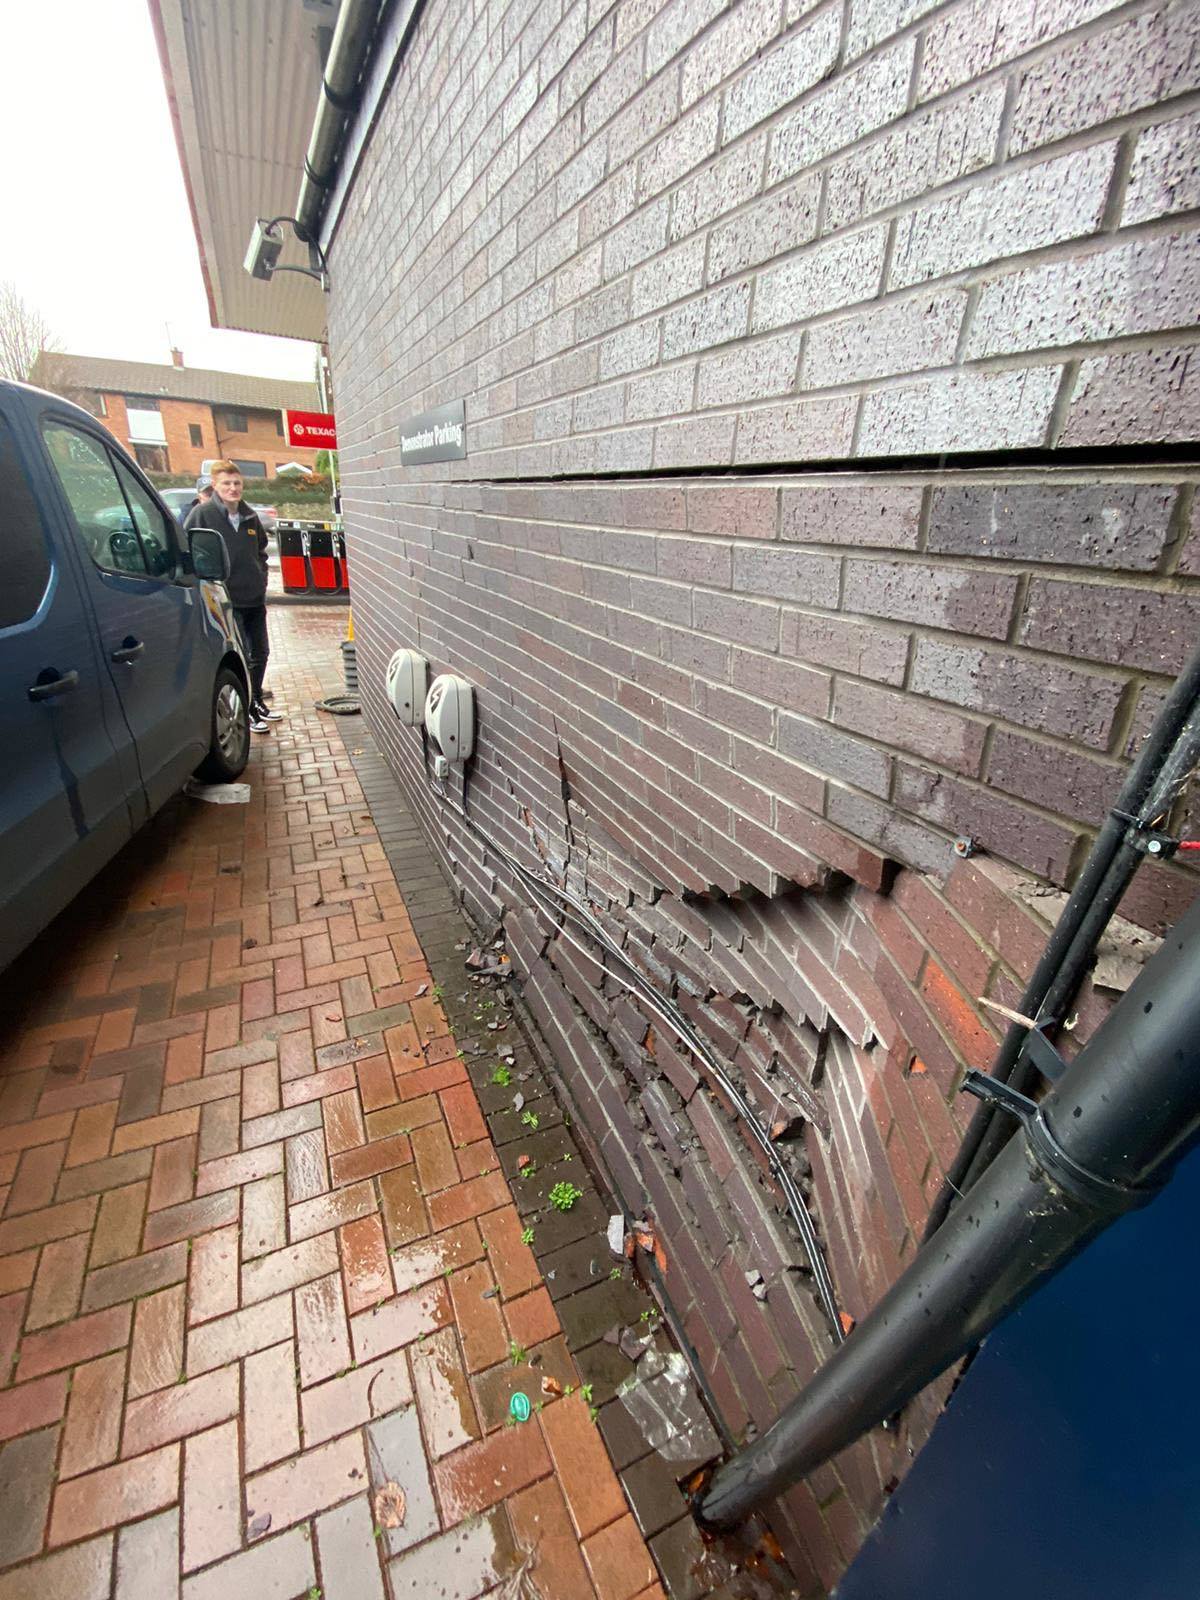 A side wall of the Bradleys Costcutter forecourt shop in Llanidloes was damaged by a vehicle on New Years Eve (Saturday, Decembr 31, 2022). Pictures by Bradleys Costcutter Llanidloes